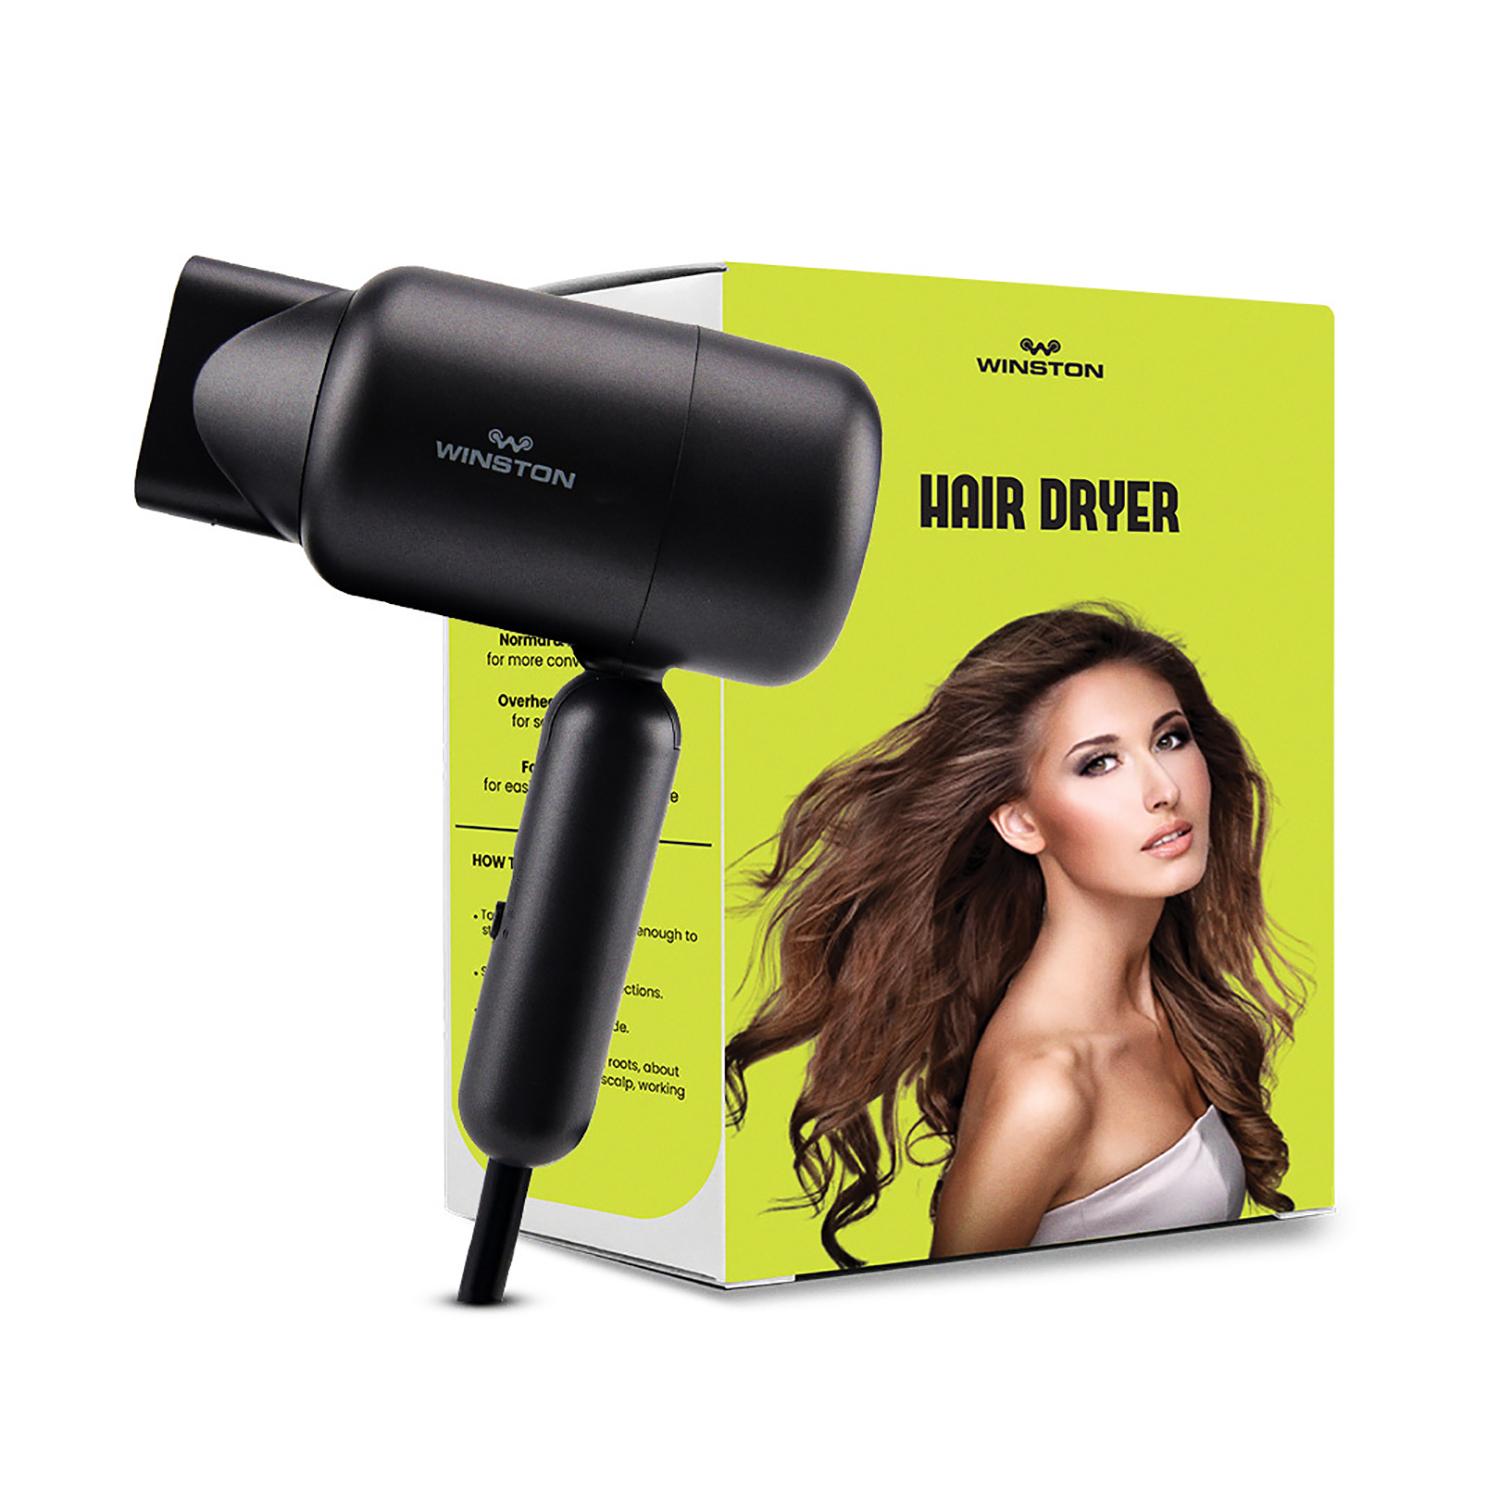 WINSTON | WINSTON Hair Dryer with Foldable Compact Design 1200W - Black (1Pc)